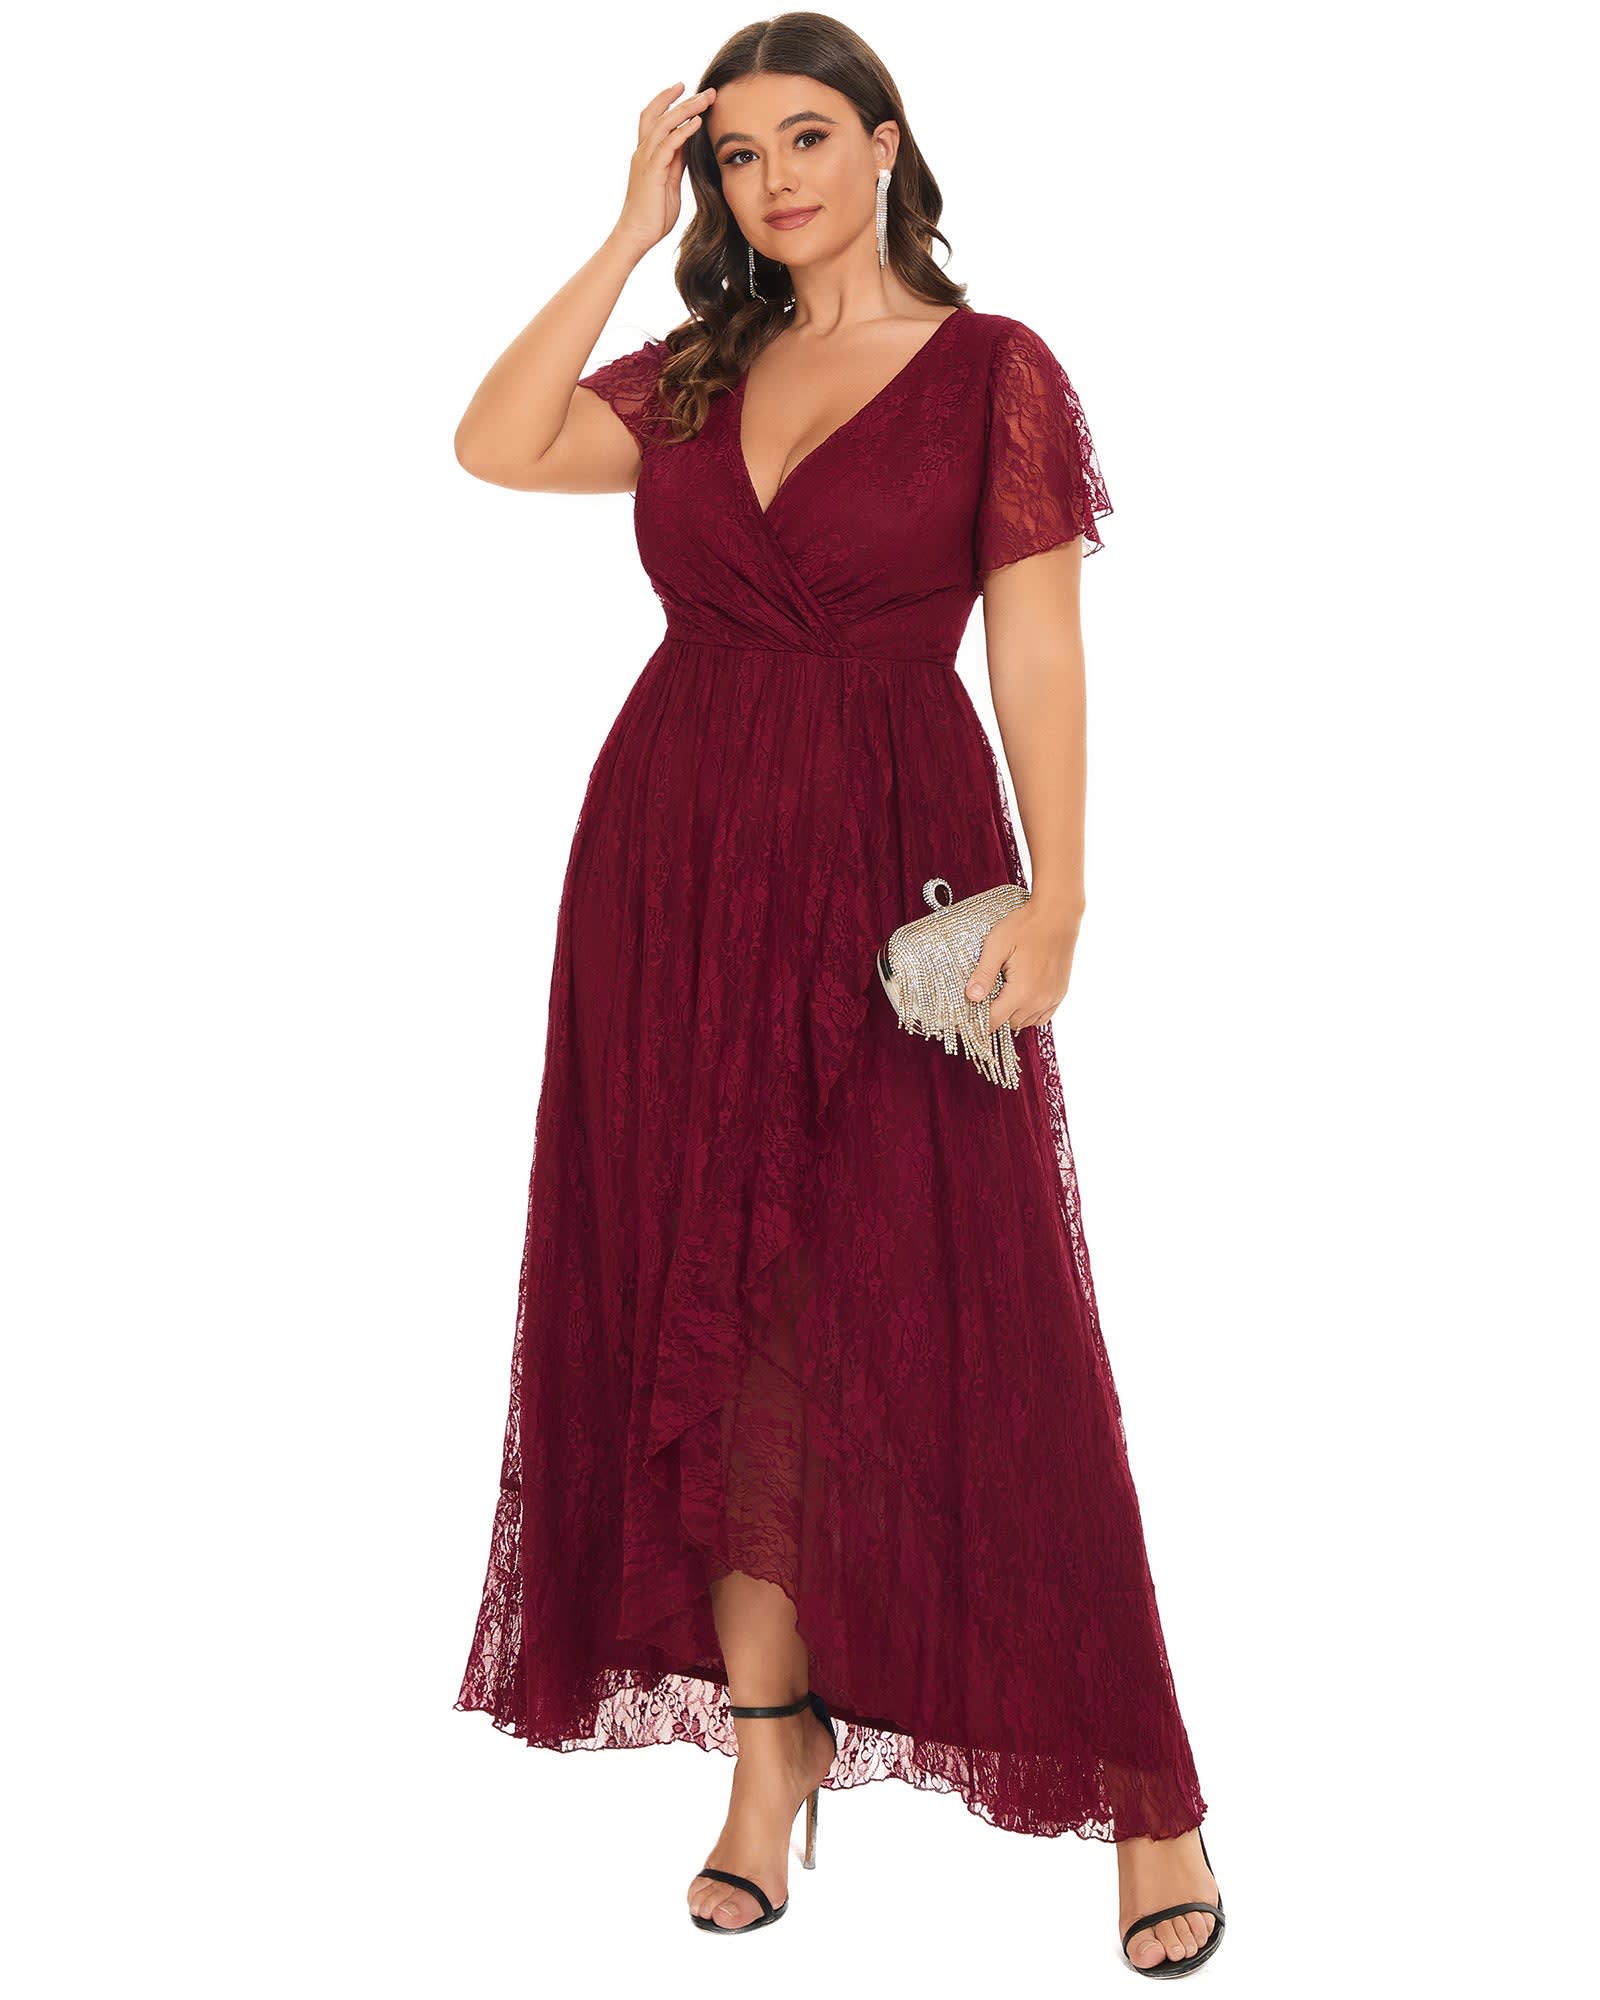 Plus Size Outfits For Special Occasions